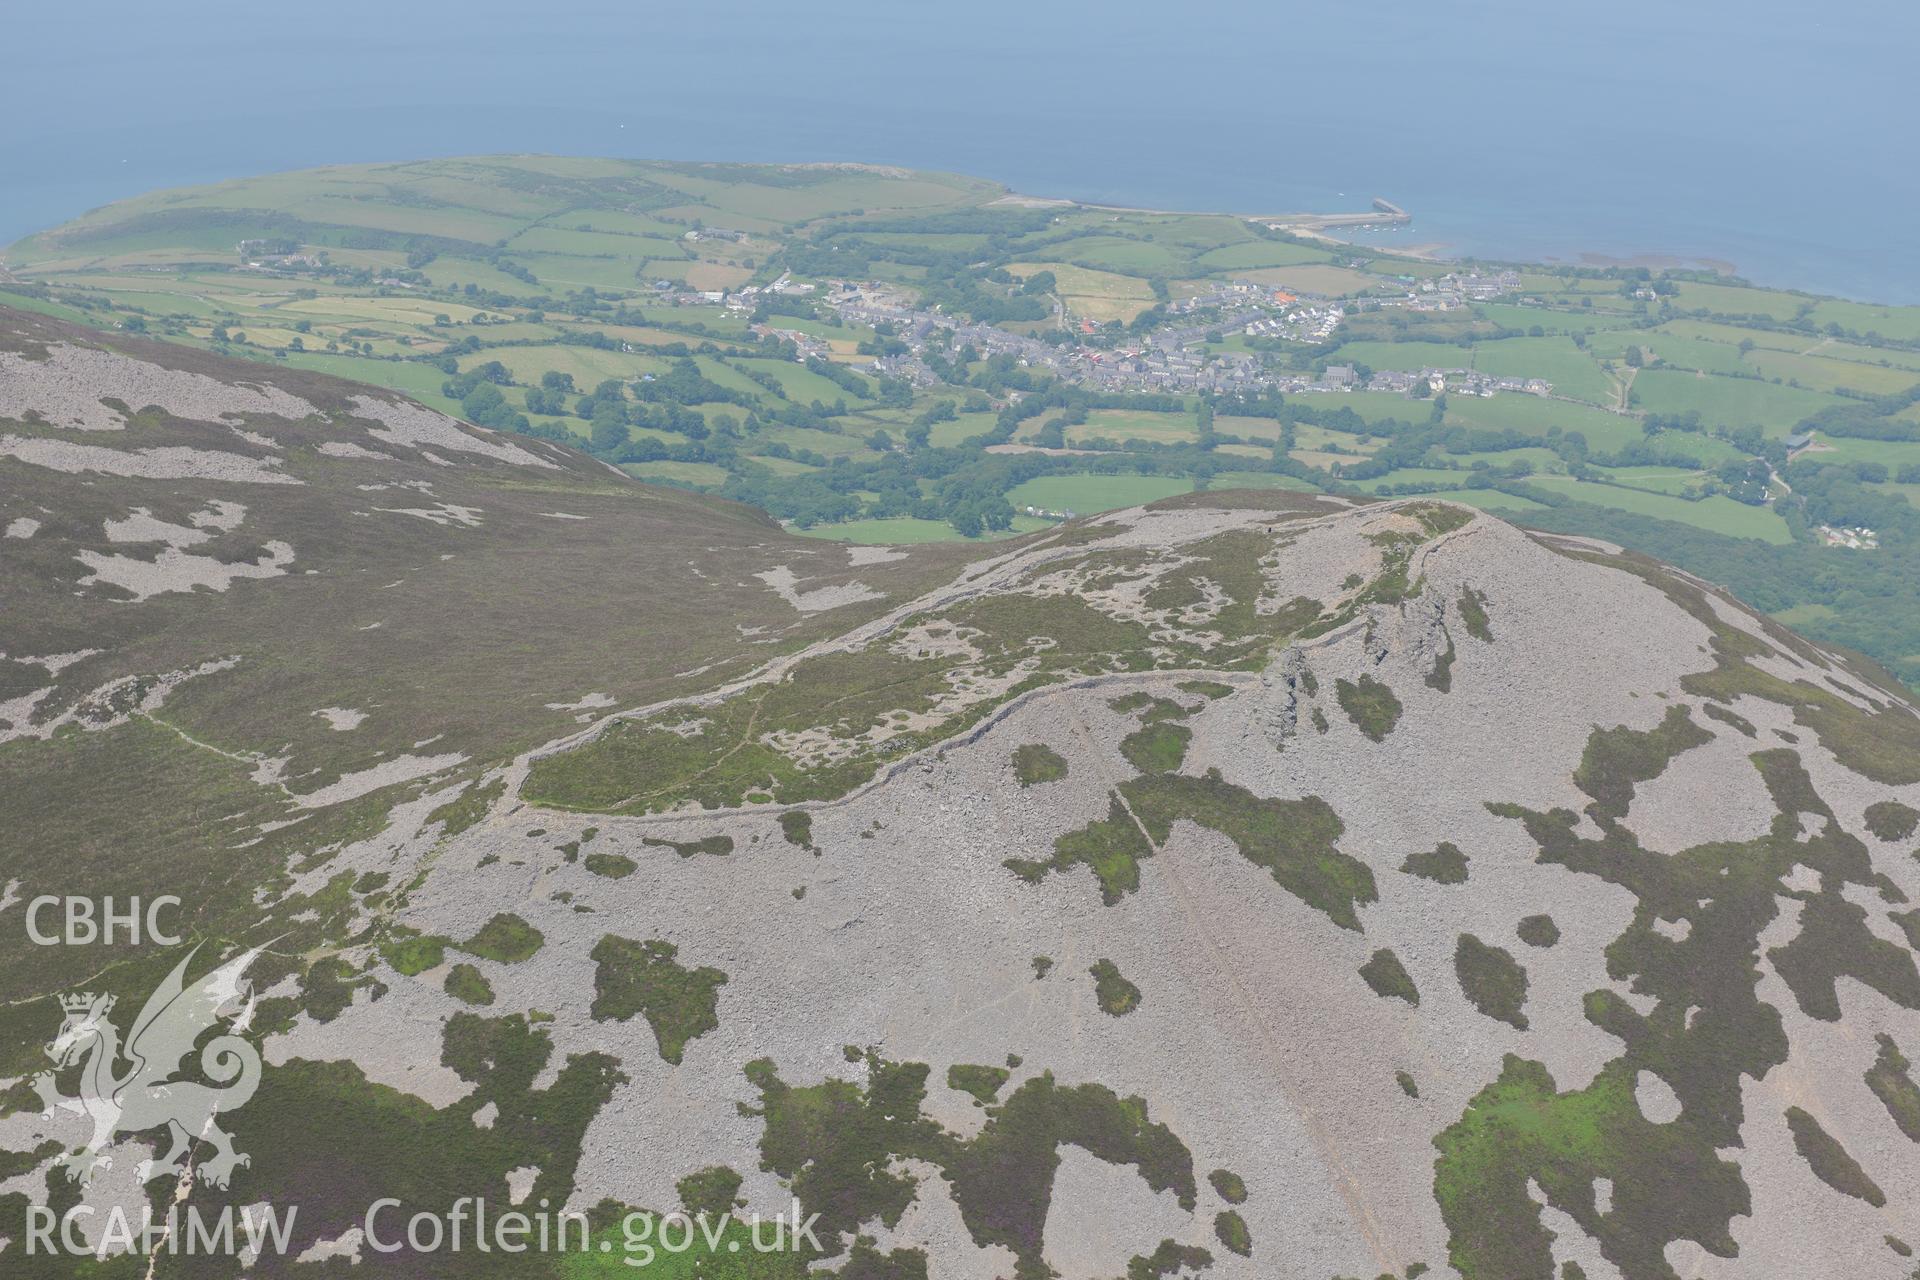 Tre'r Ceiri hillfort with the village of Trefor beyond, on the Lleyn Peninsula. Oblique aerial photograph taken during the Royal Commission?s programme of archaeological aerial reconnaissance by Toby Driver on 12th July 2013.